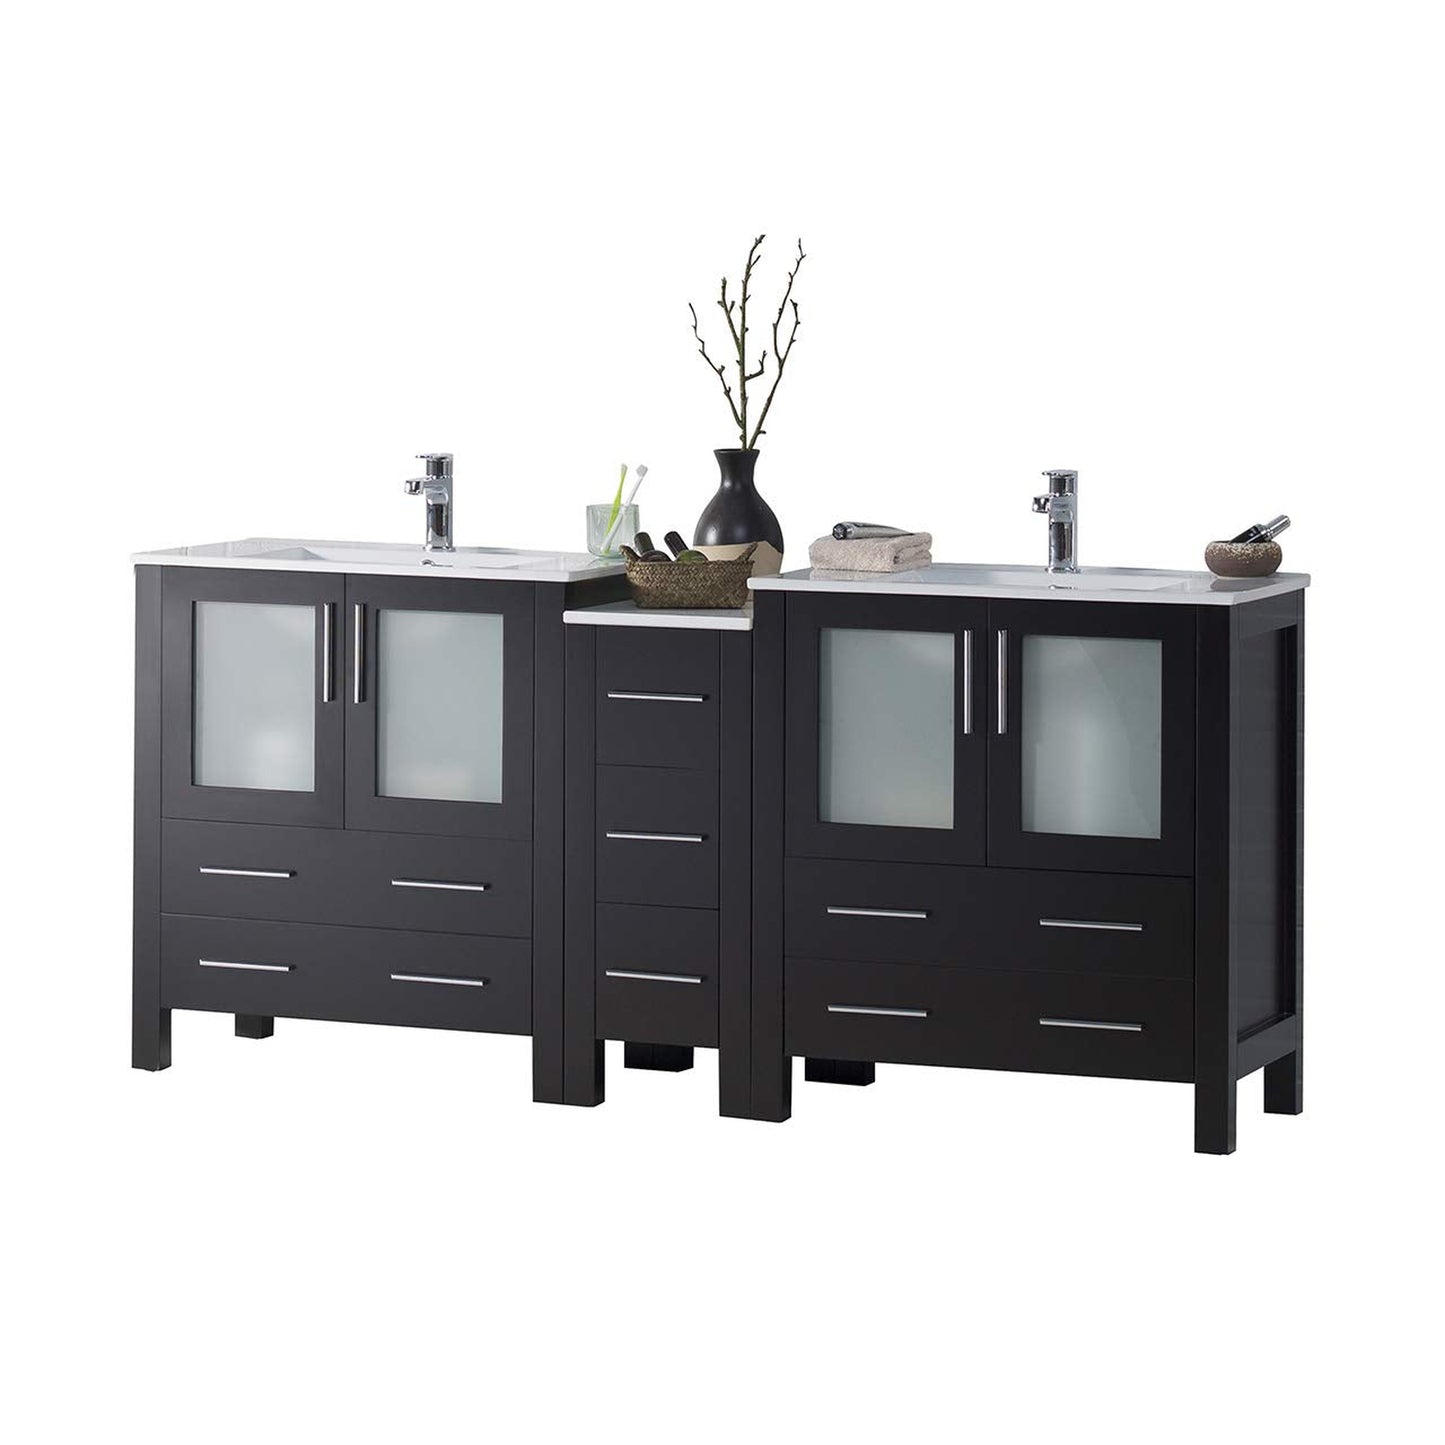 Blossom Sydney 72 Espresso Freestanding Vanity Set With Ceramic Top and Integrated Single Sink